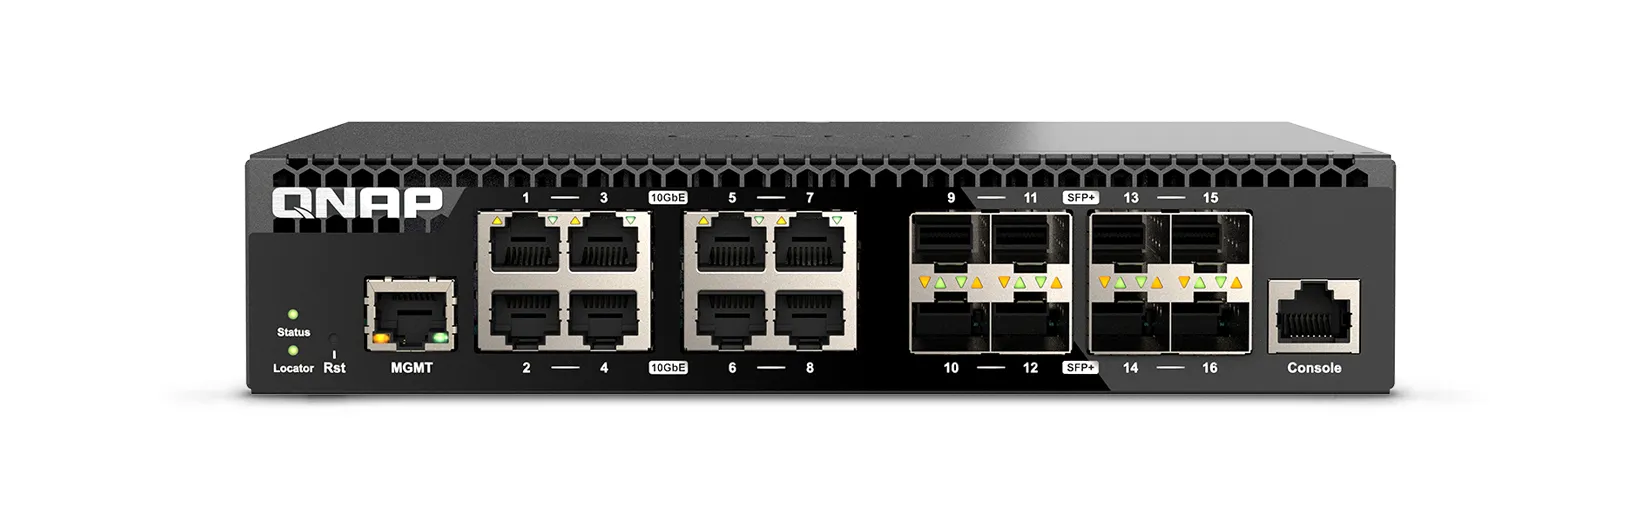 Vente Switchs et Hubs QNAP QSW-M3216R-8S8T Managed Switch 16 port of 10GbE